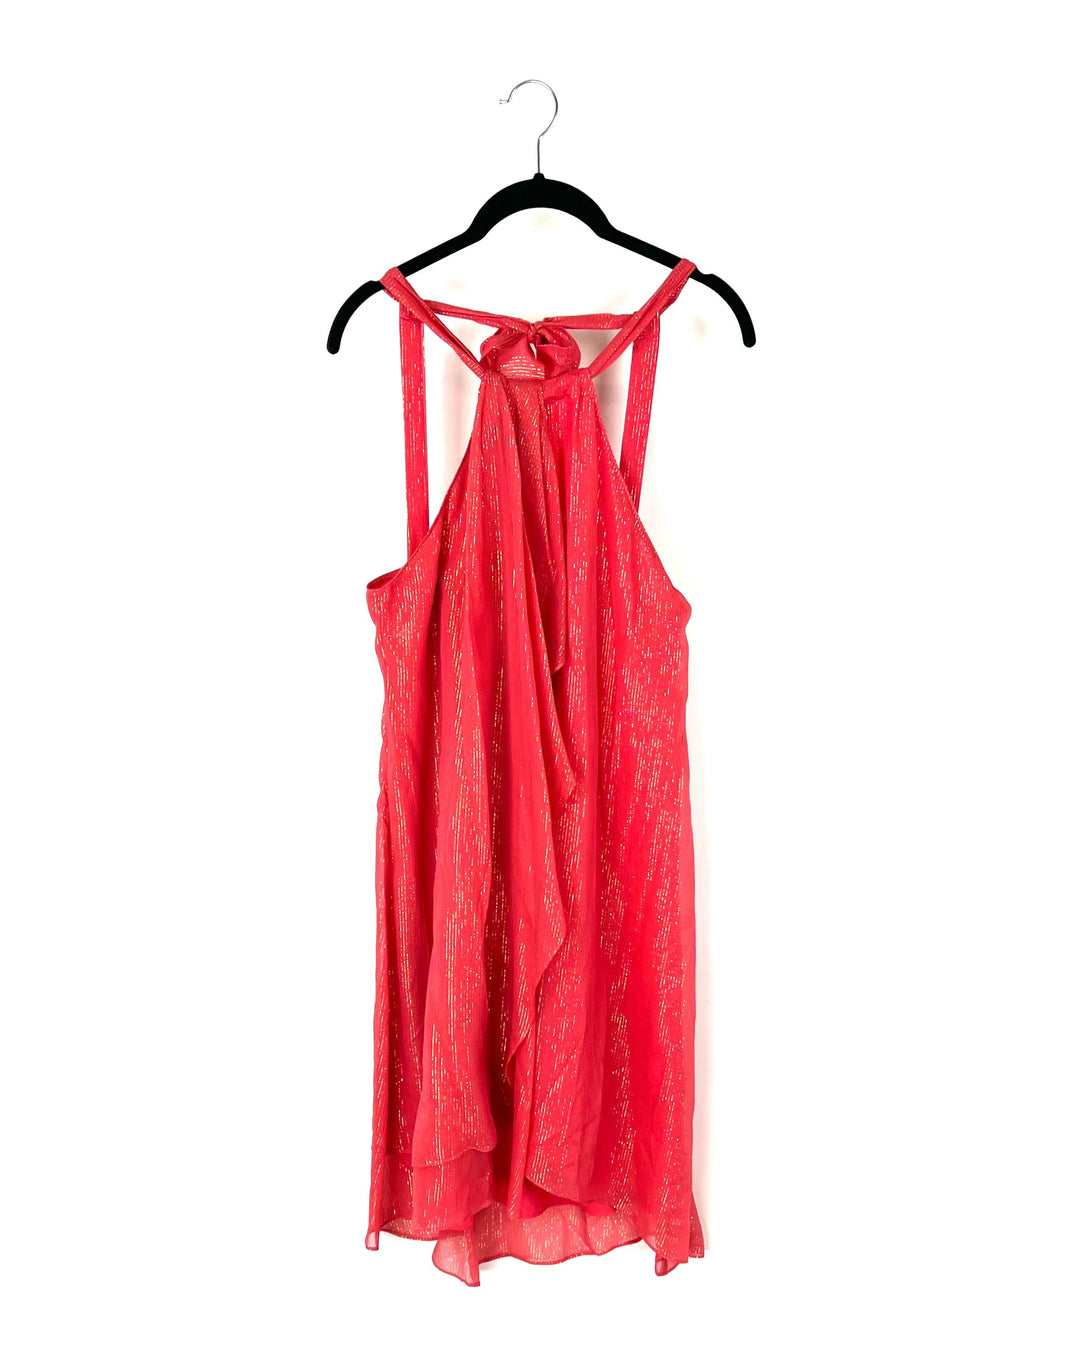 Coral And Metallic Gold Dress - Size 4-6